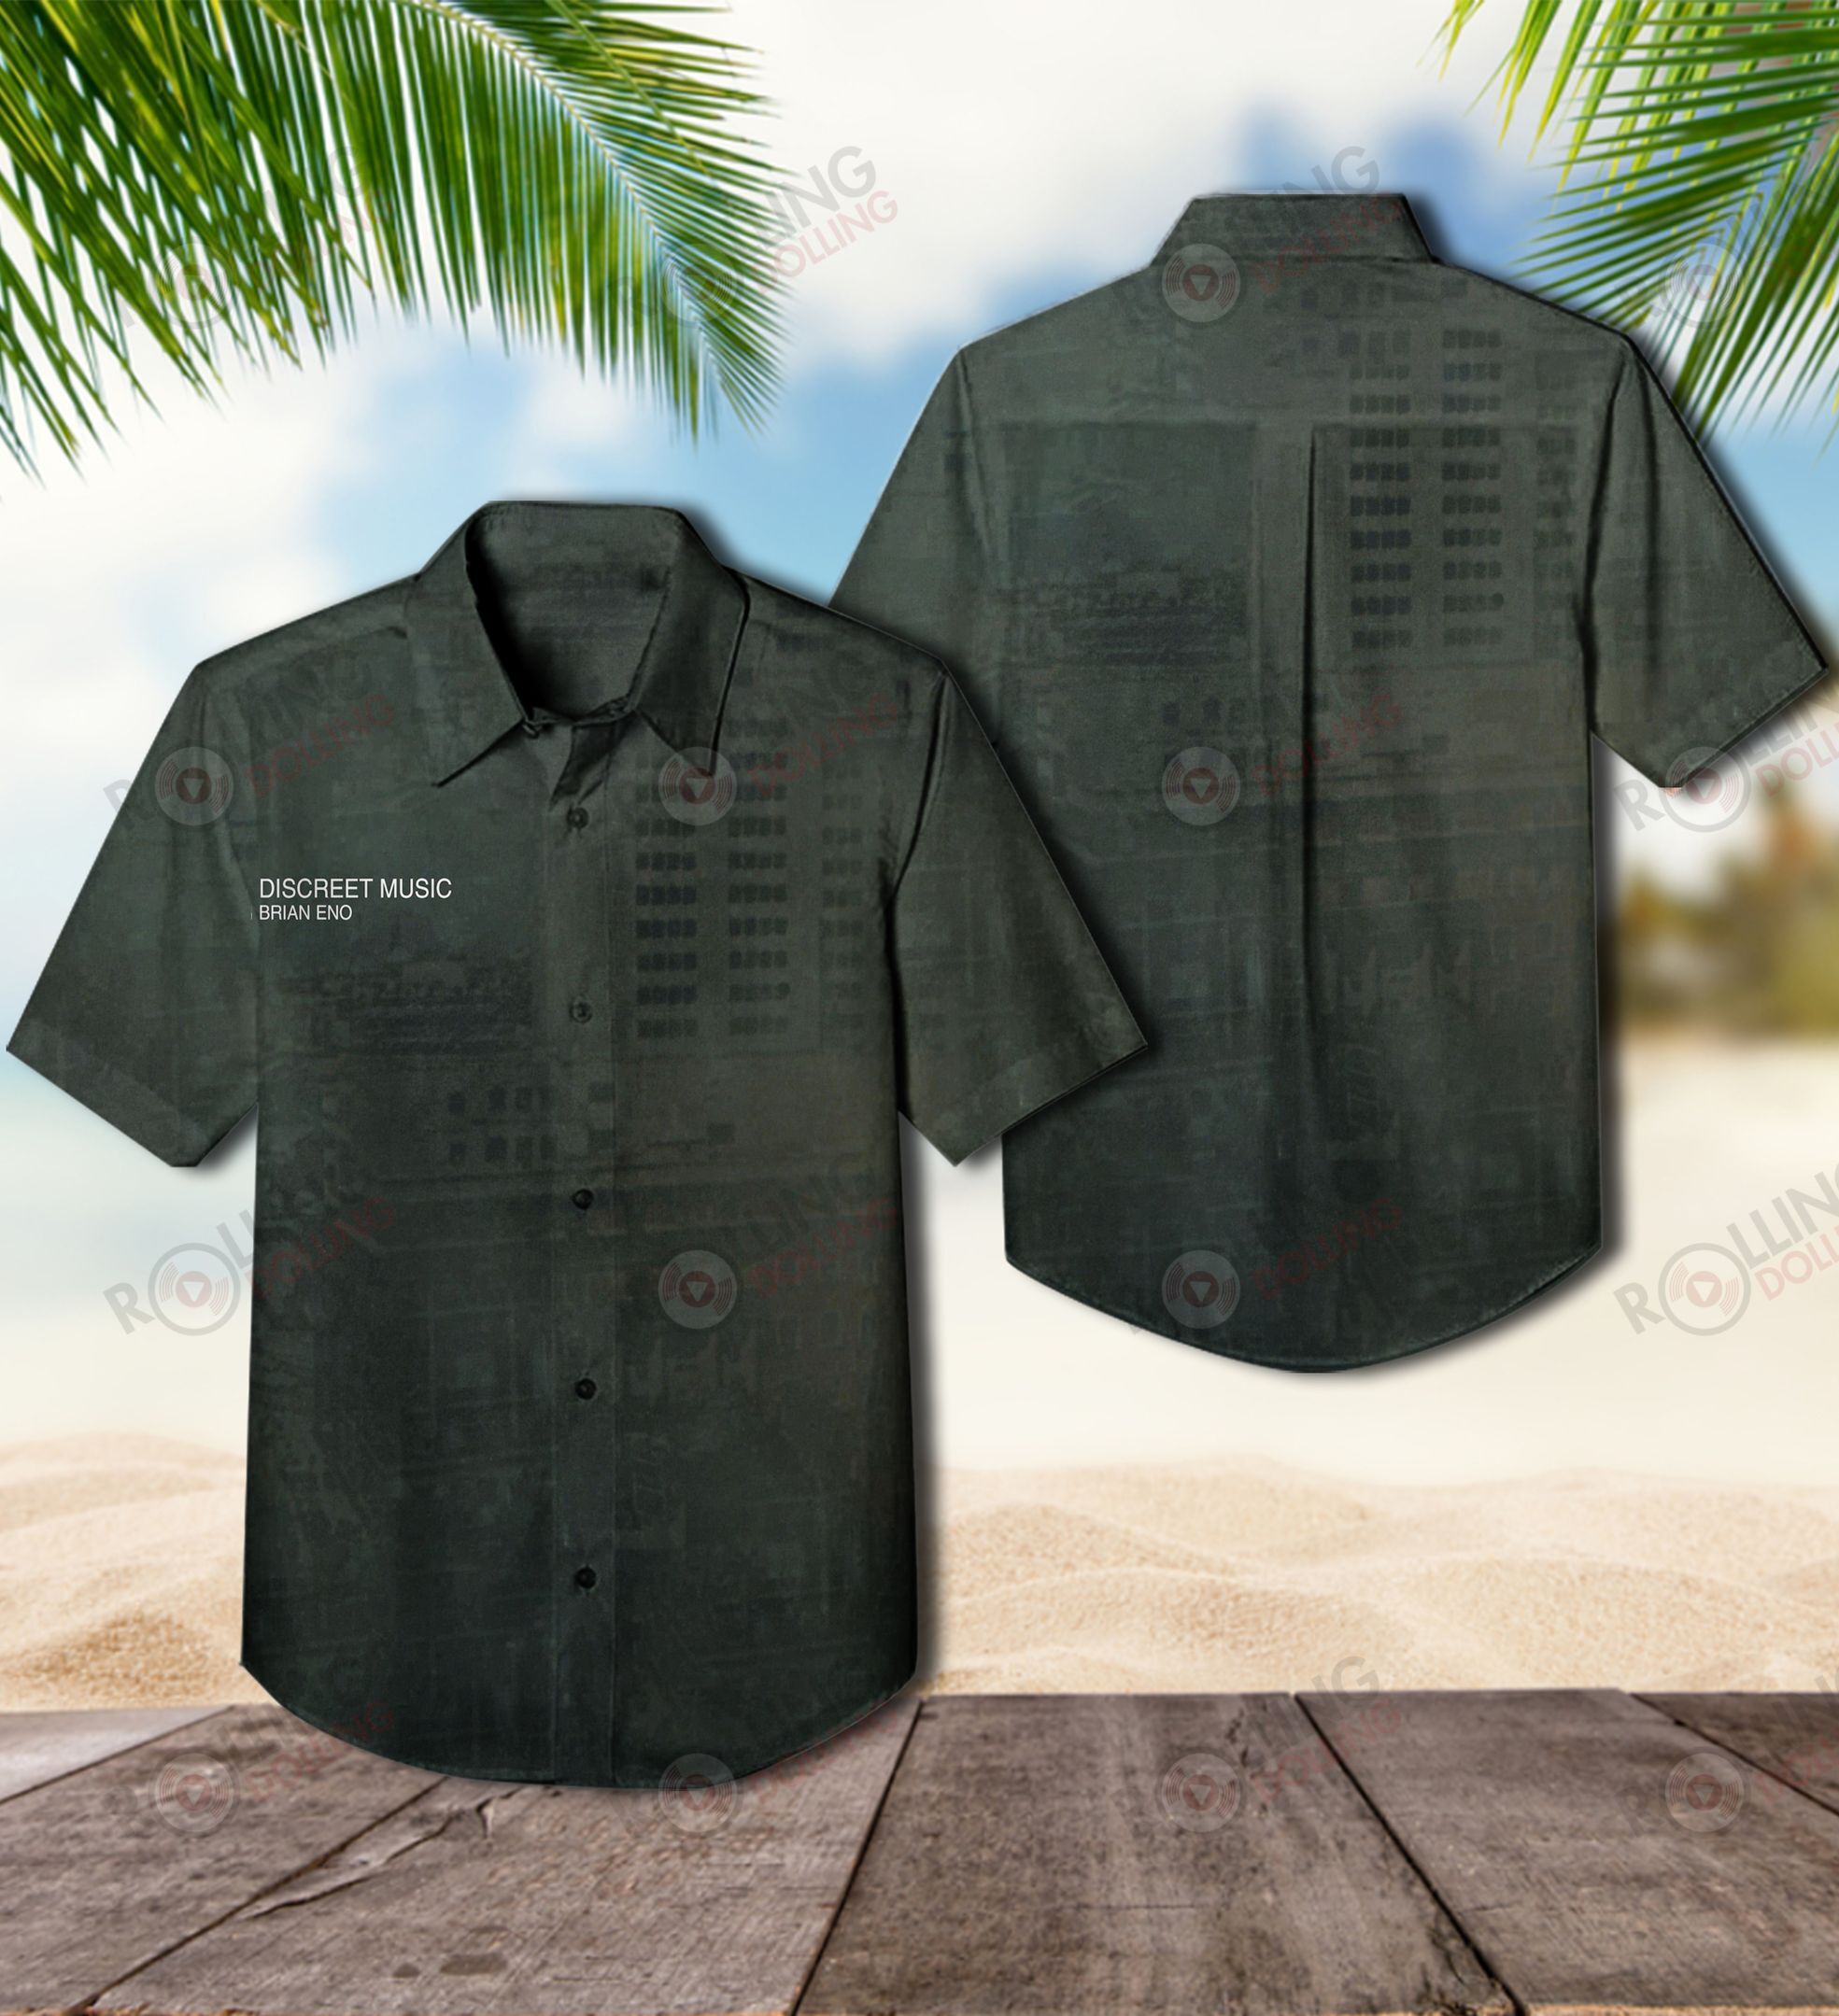 Now you can show off your love of all things band with this Hawaiian Shirt 93